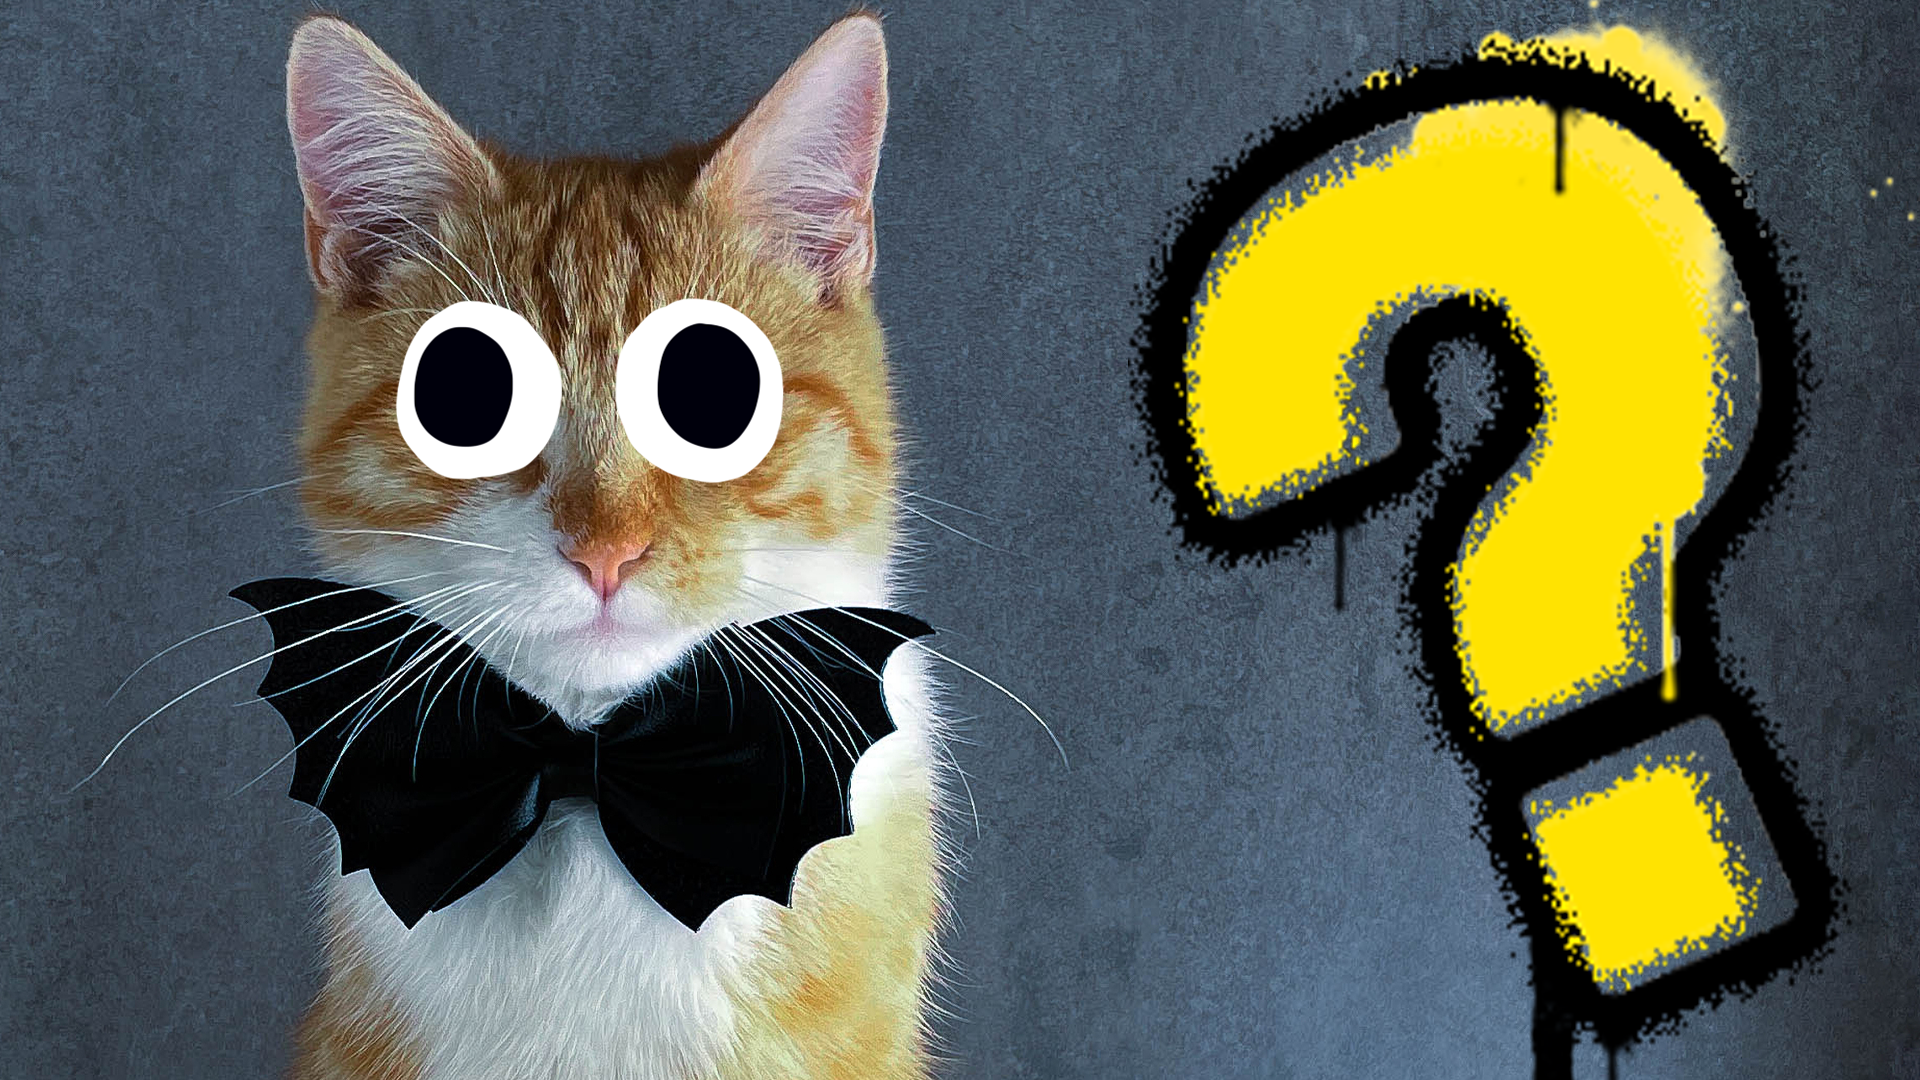 Cat with bat bow tie and question mark